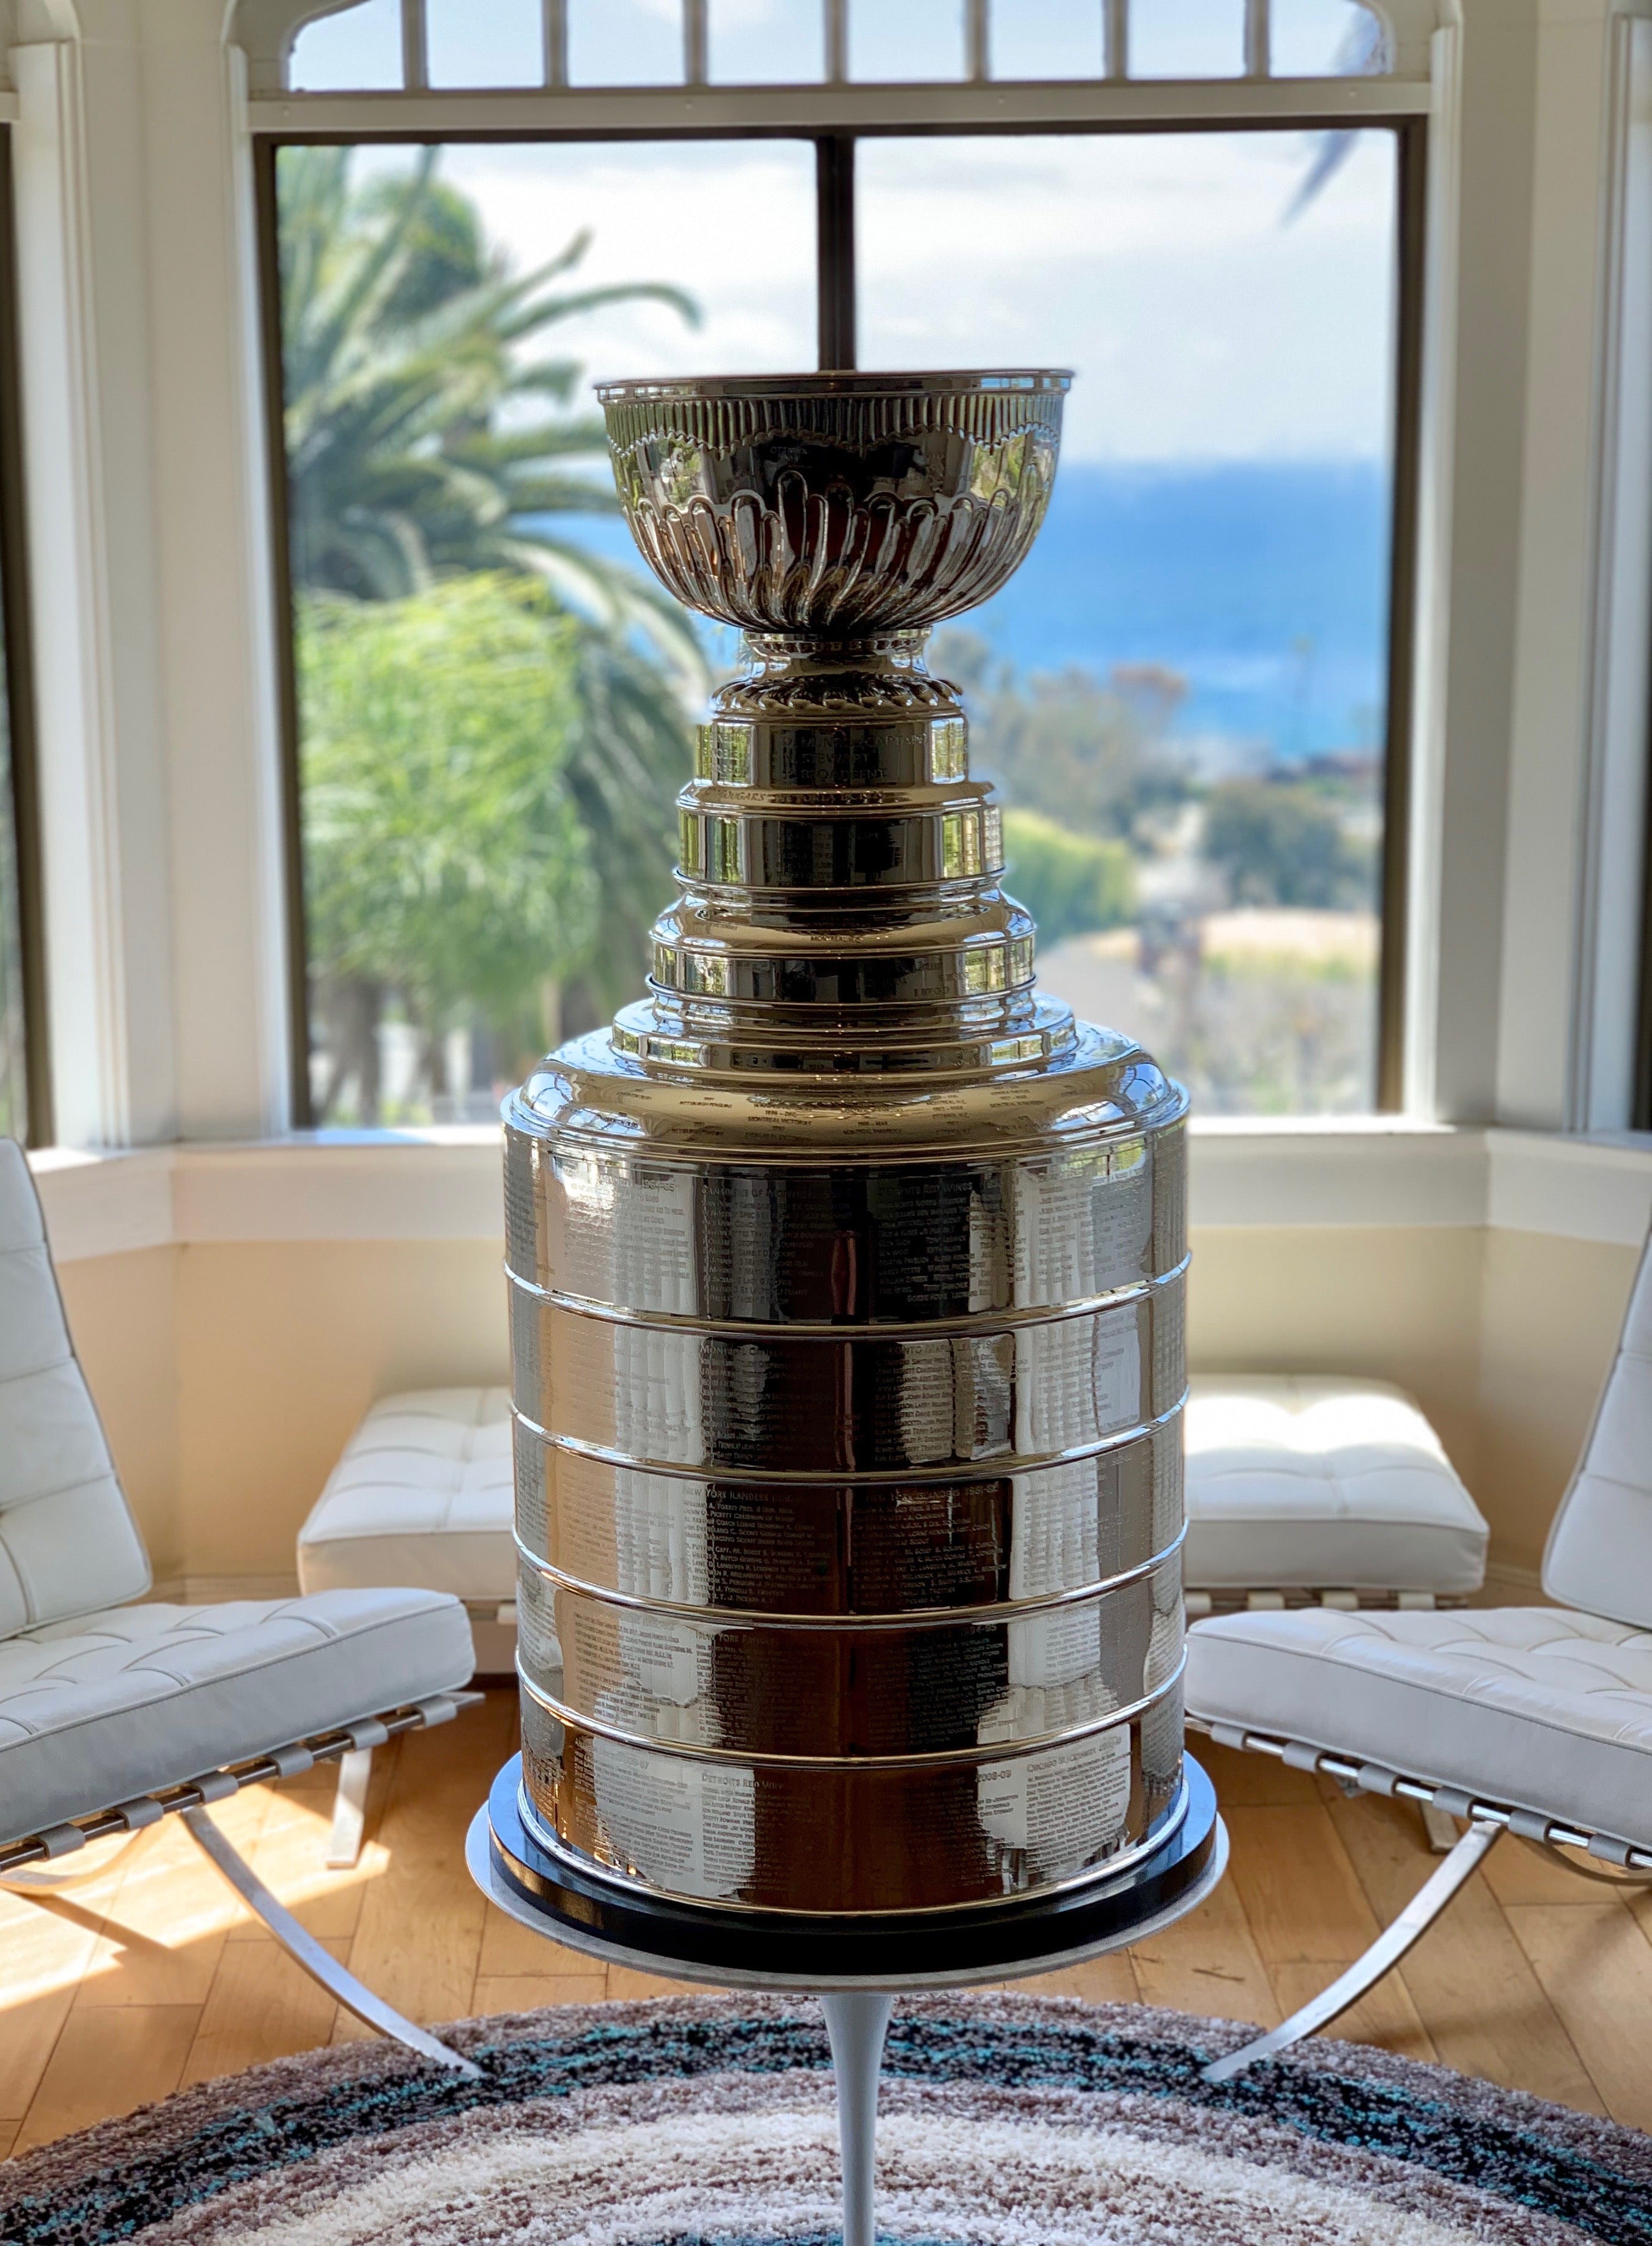 NHL Officially Licensed 25 Replica Stanley Cup Trophy – UPI